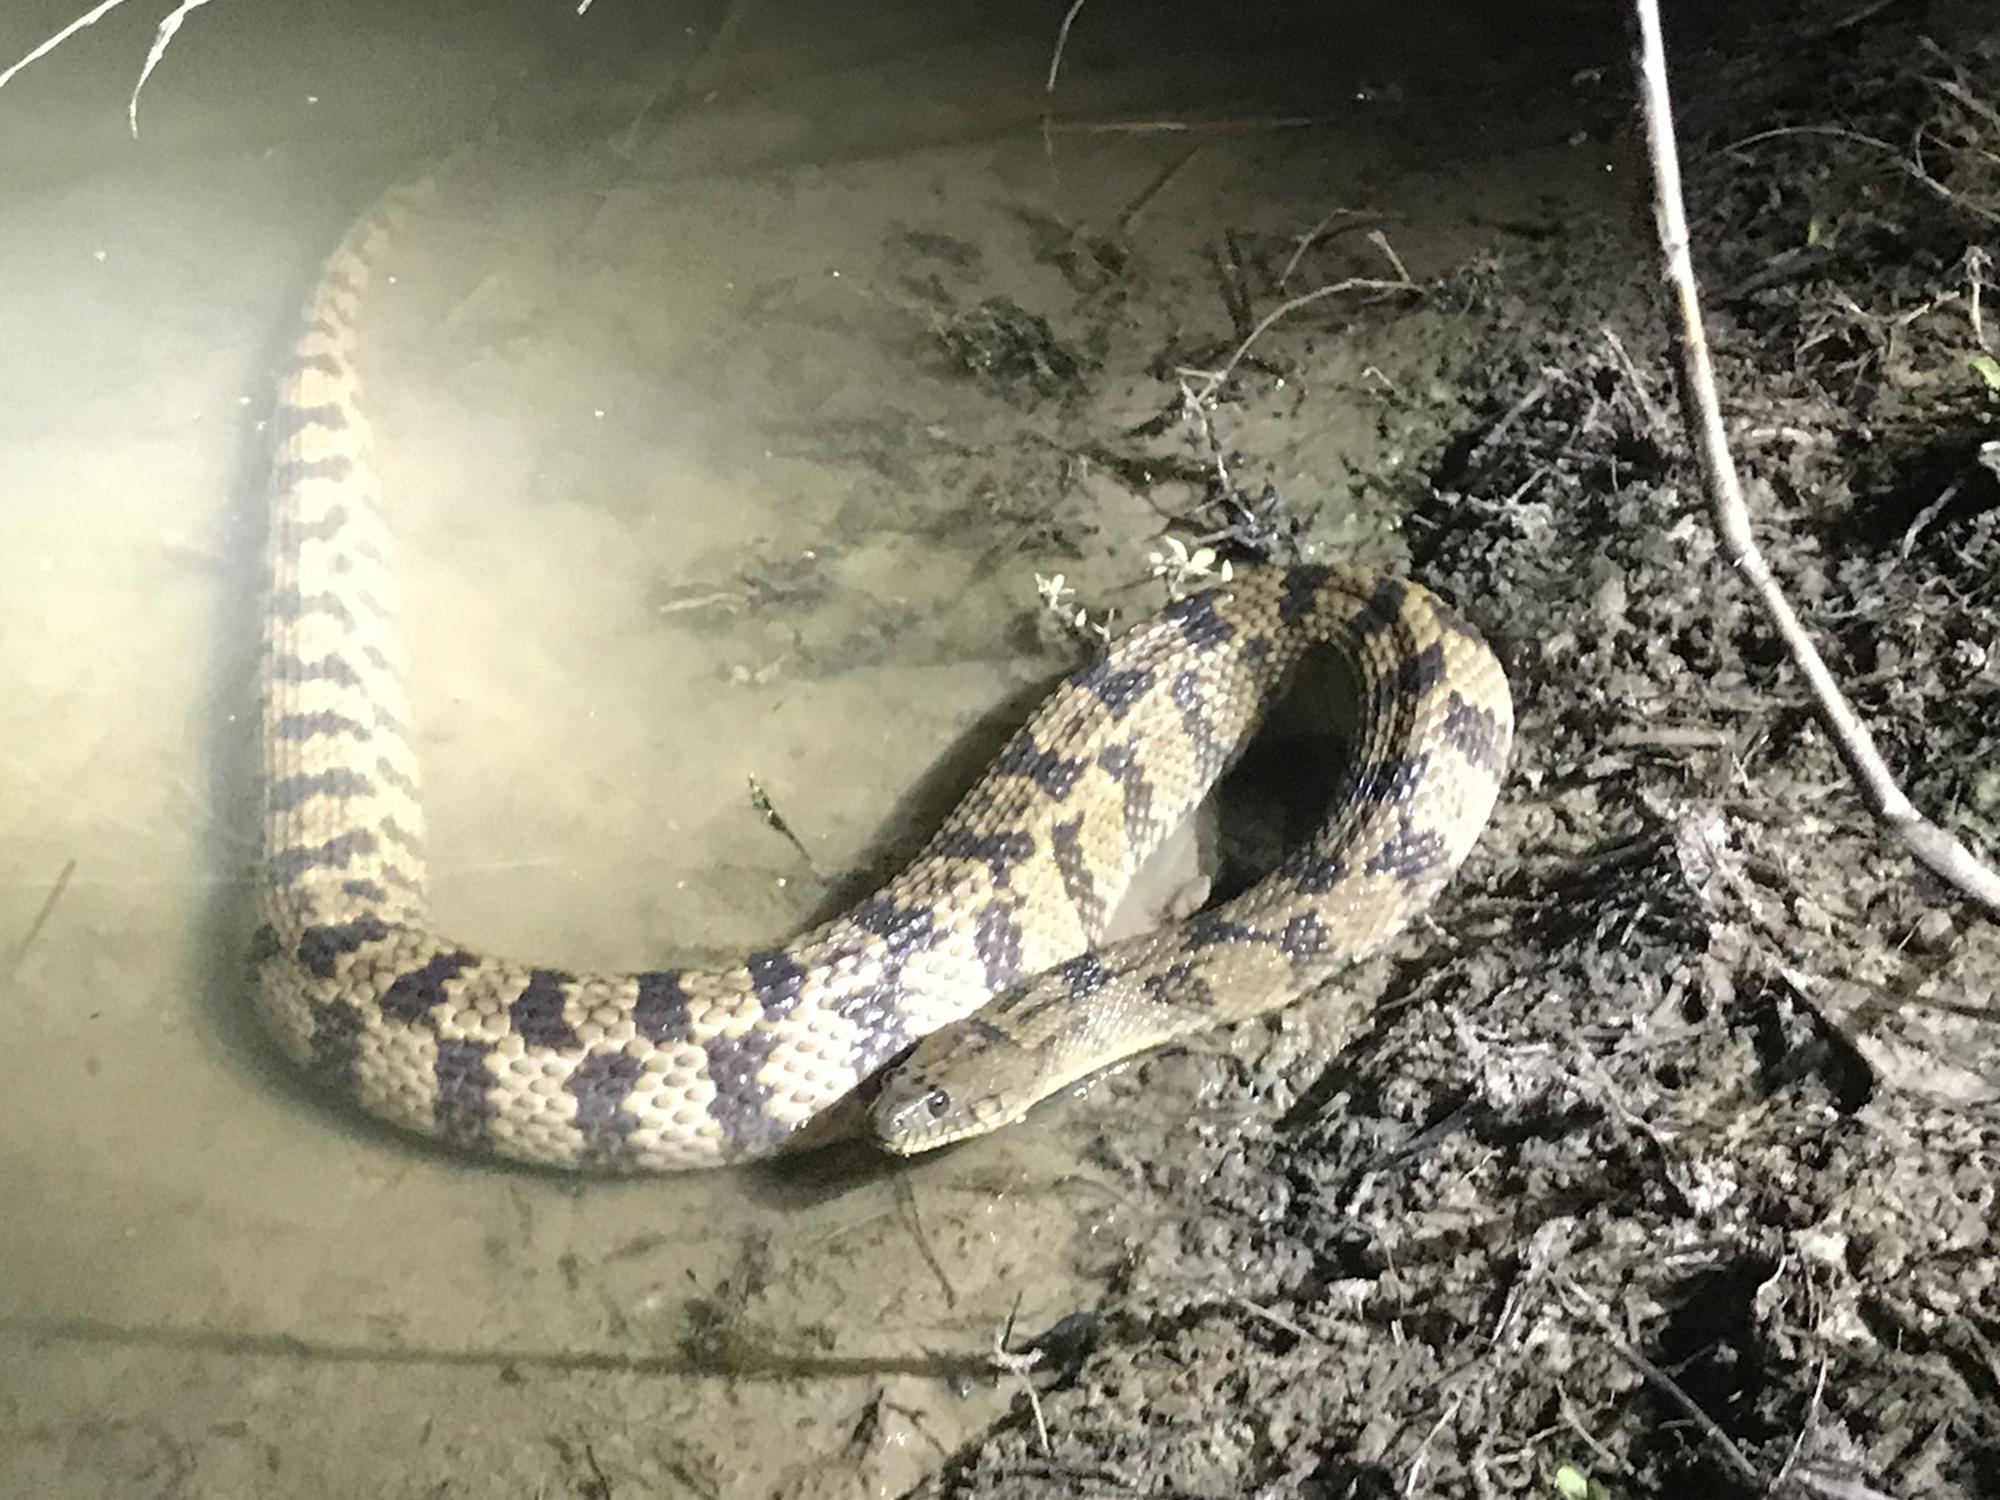 Bright light shines on a large black and gray snake in the water along a pond’s edge at night.